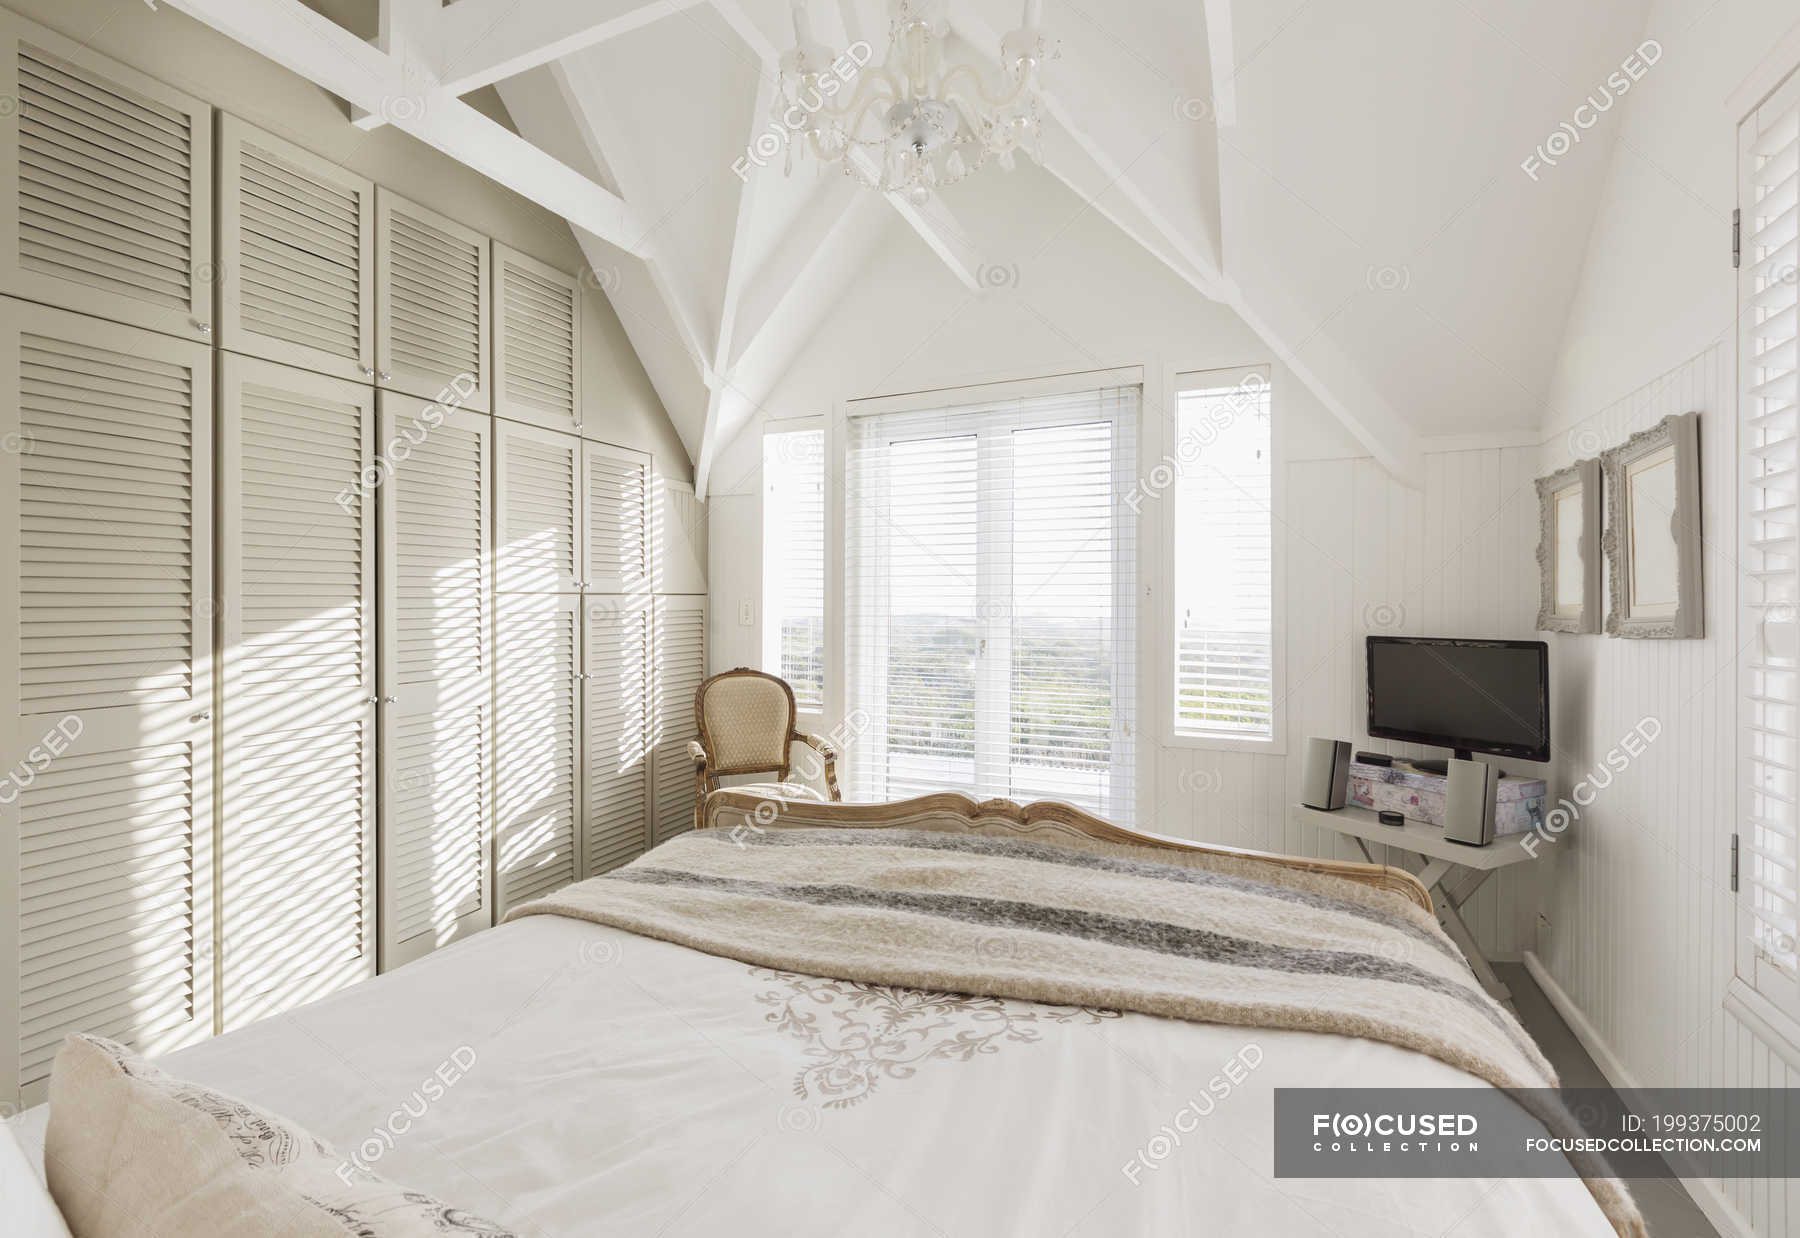 Tranquil Sunny White Bedroom With Vaulted Ceiling Home Interior